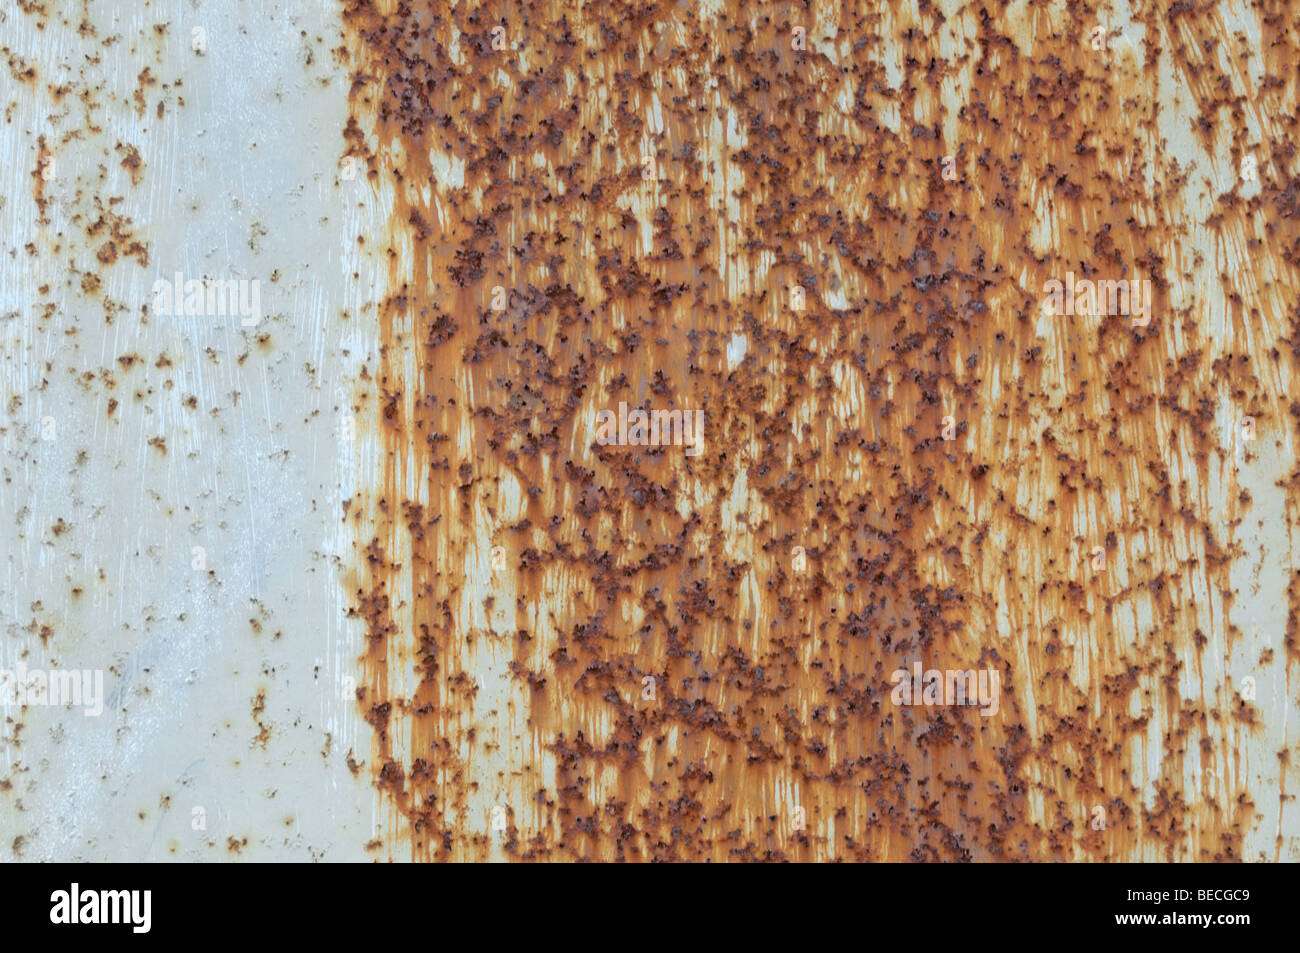 White corroded metal plate, rust stains, background Stock Photo